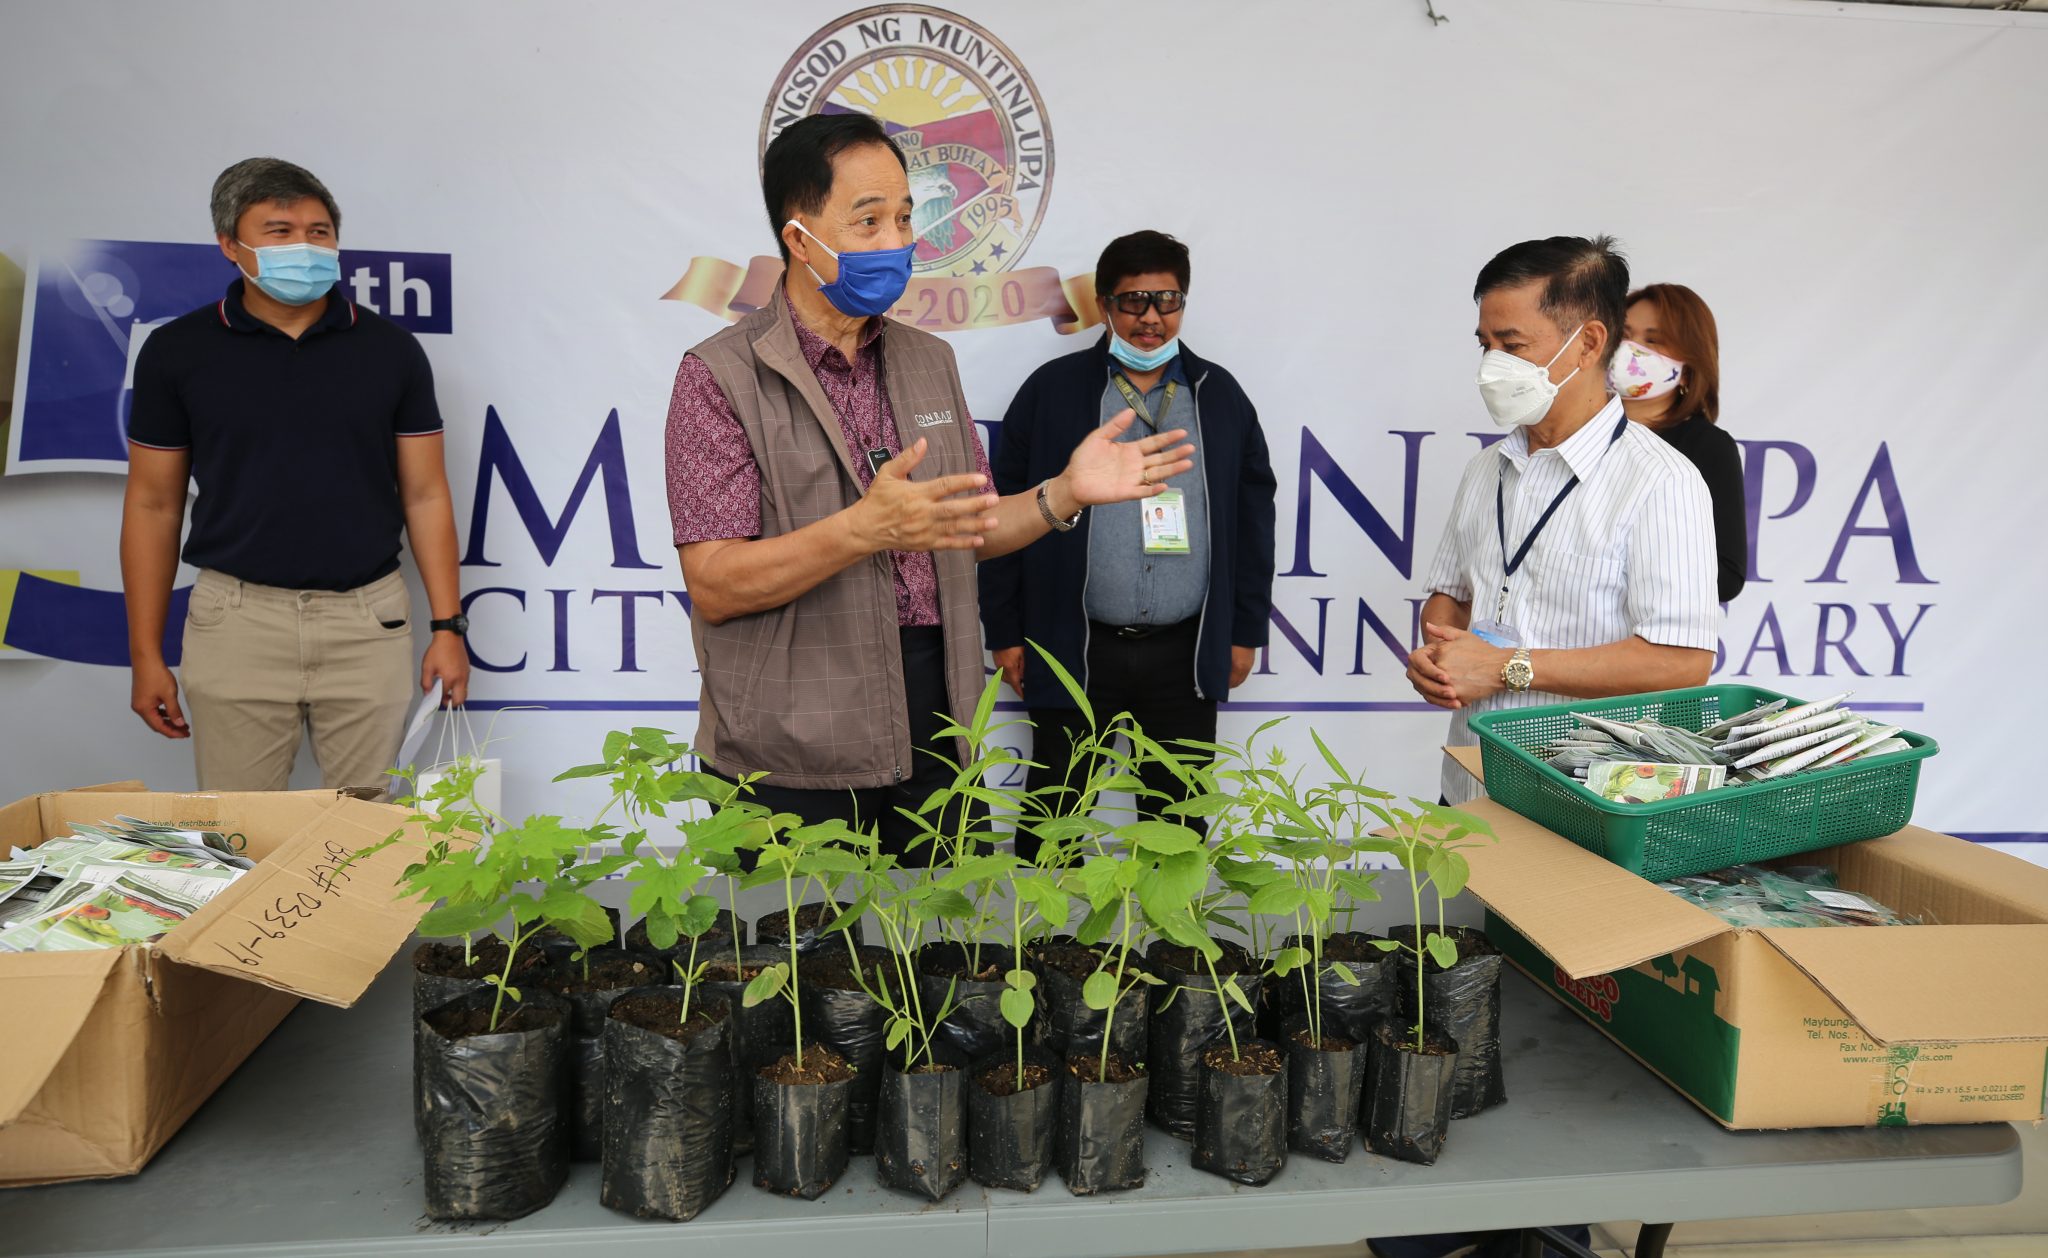 Urban agriculture project kicks off in Muntinlupa City